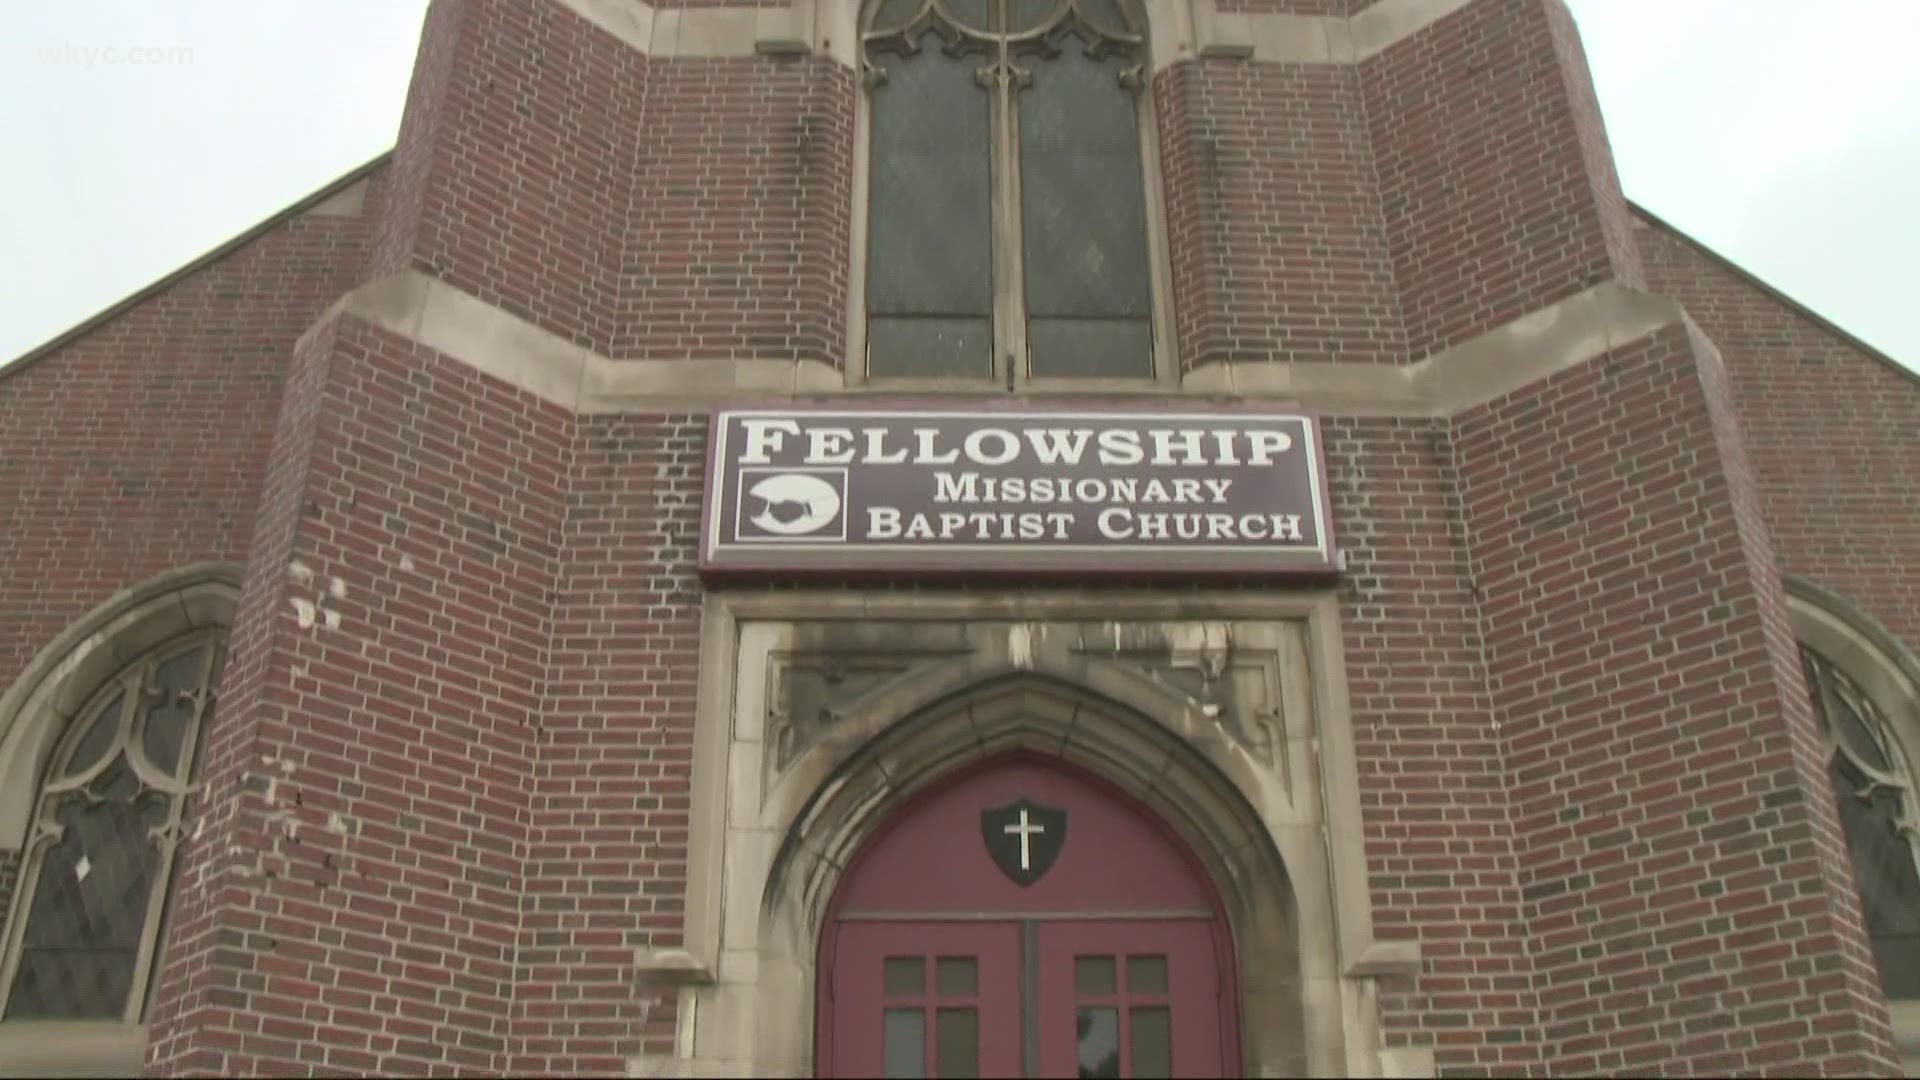 Two faith leaders explain why they've made the decision to keep their congregations out of their physical church for now. Danielle Wiggins has the story.